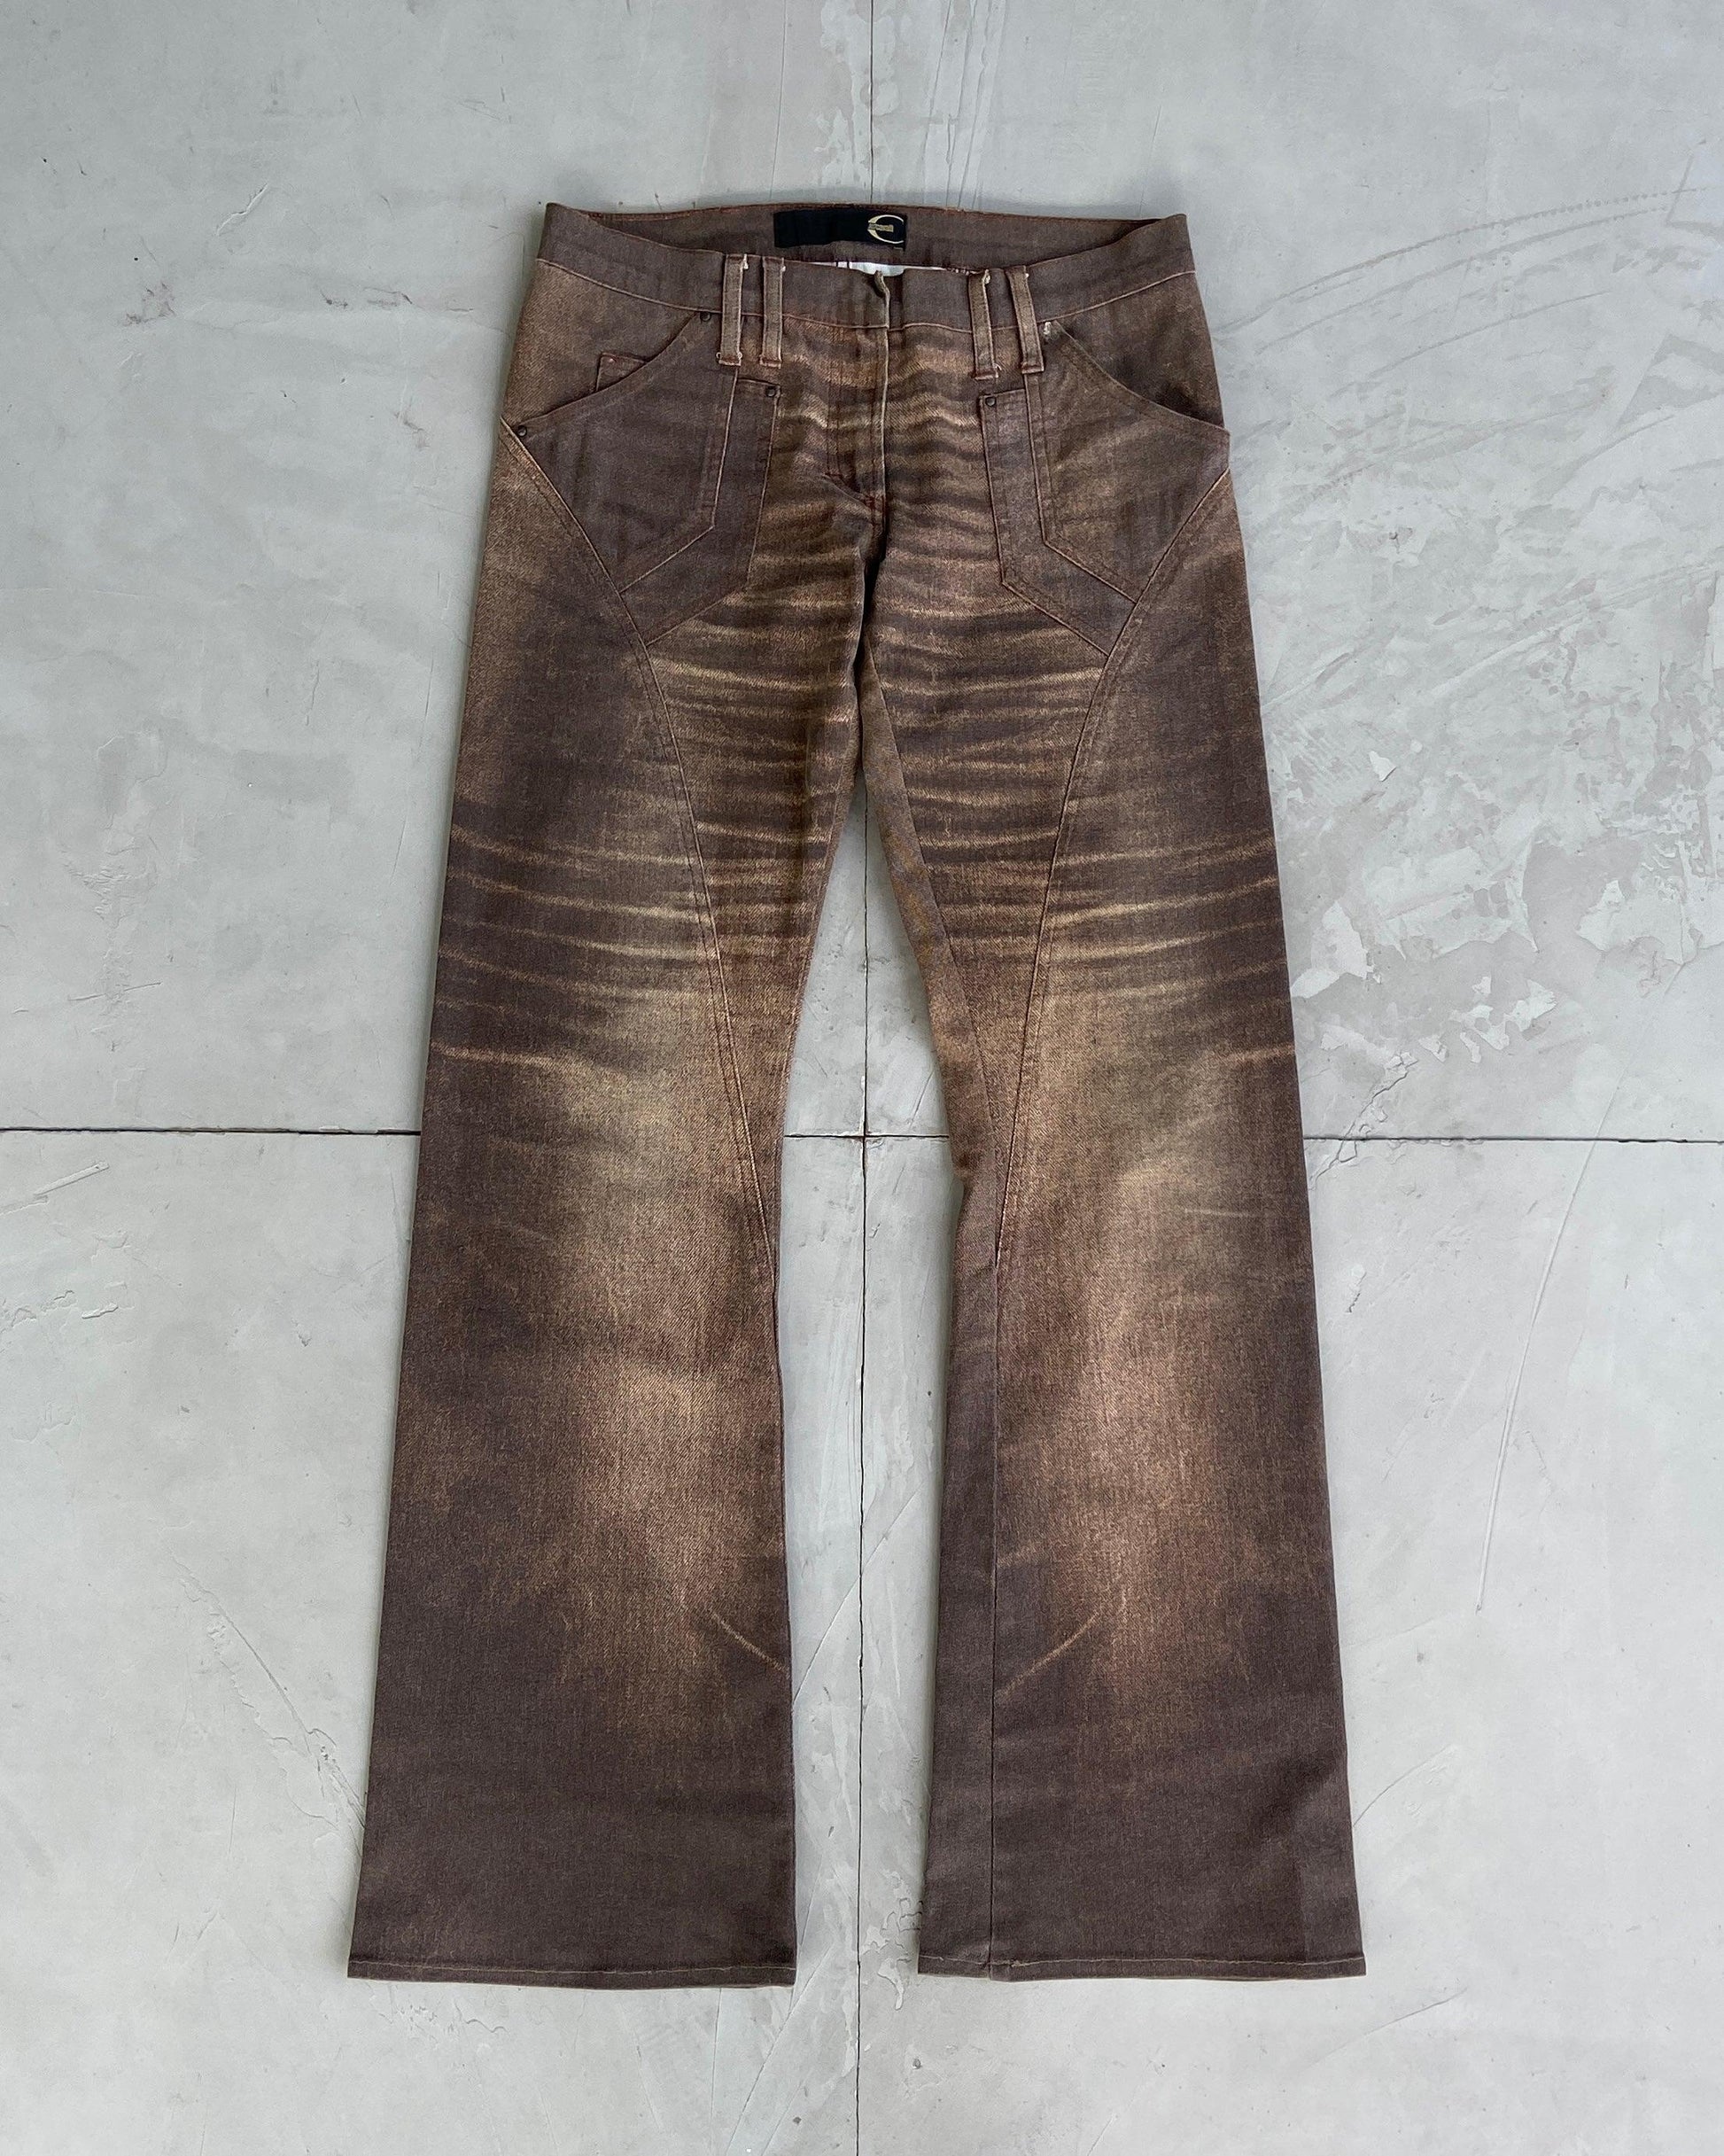 JUST CAVALLI BROWN PRINTED JEANS - S - Known Source